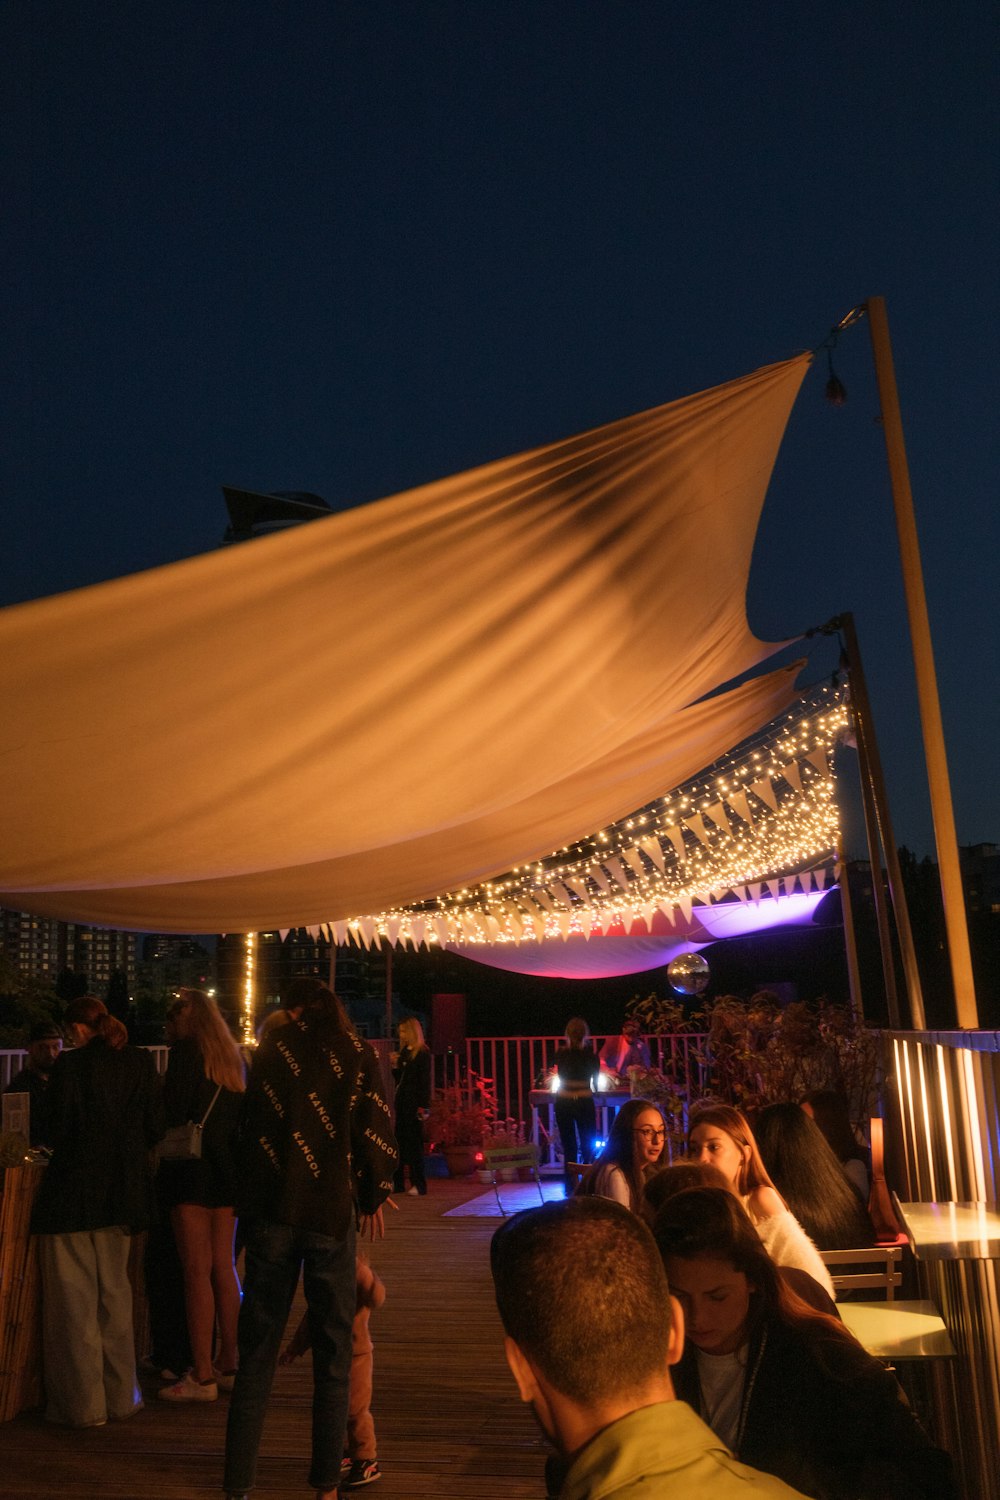 a group of people standing under a canopy at night